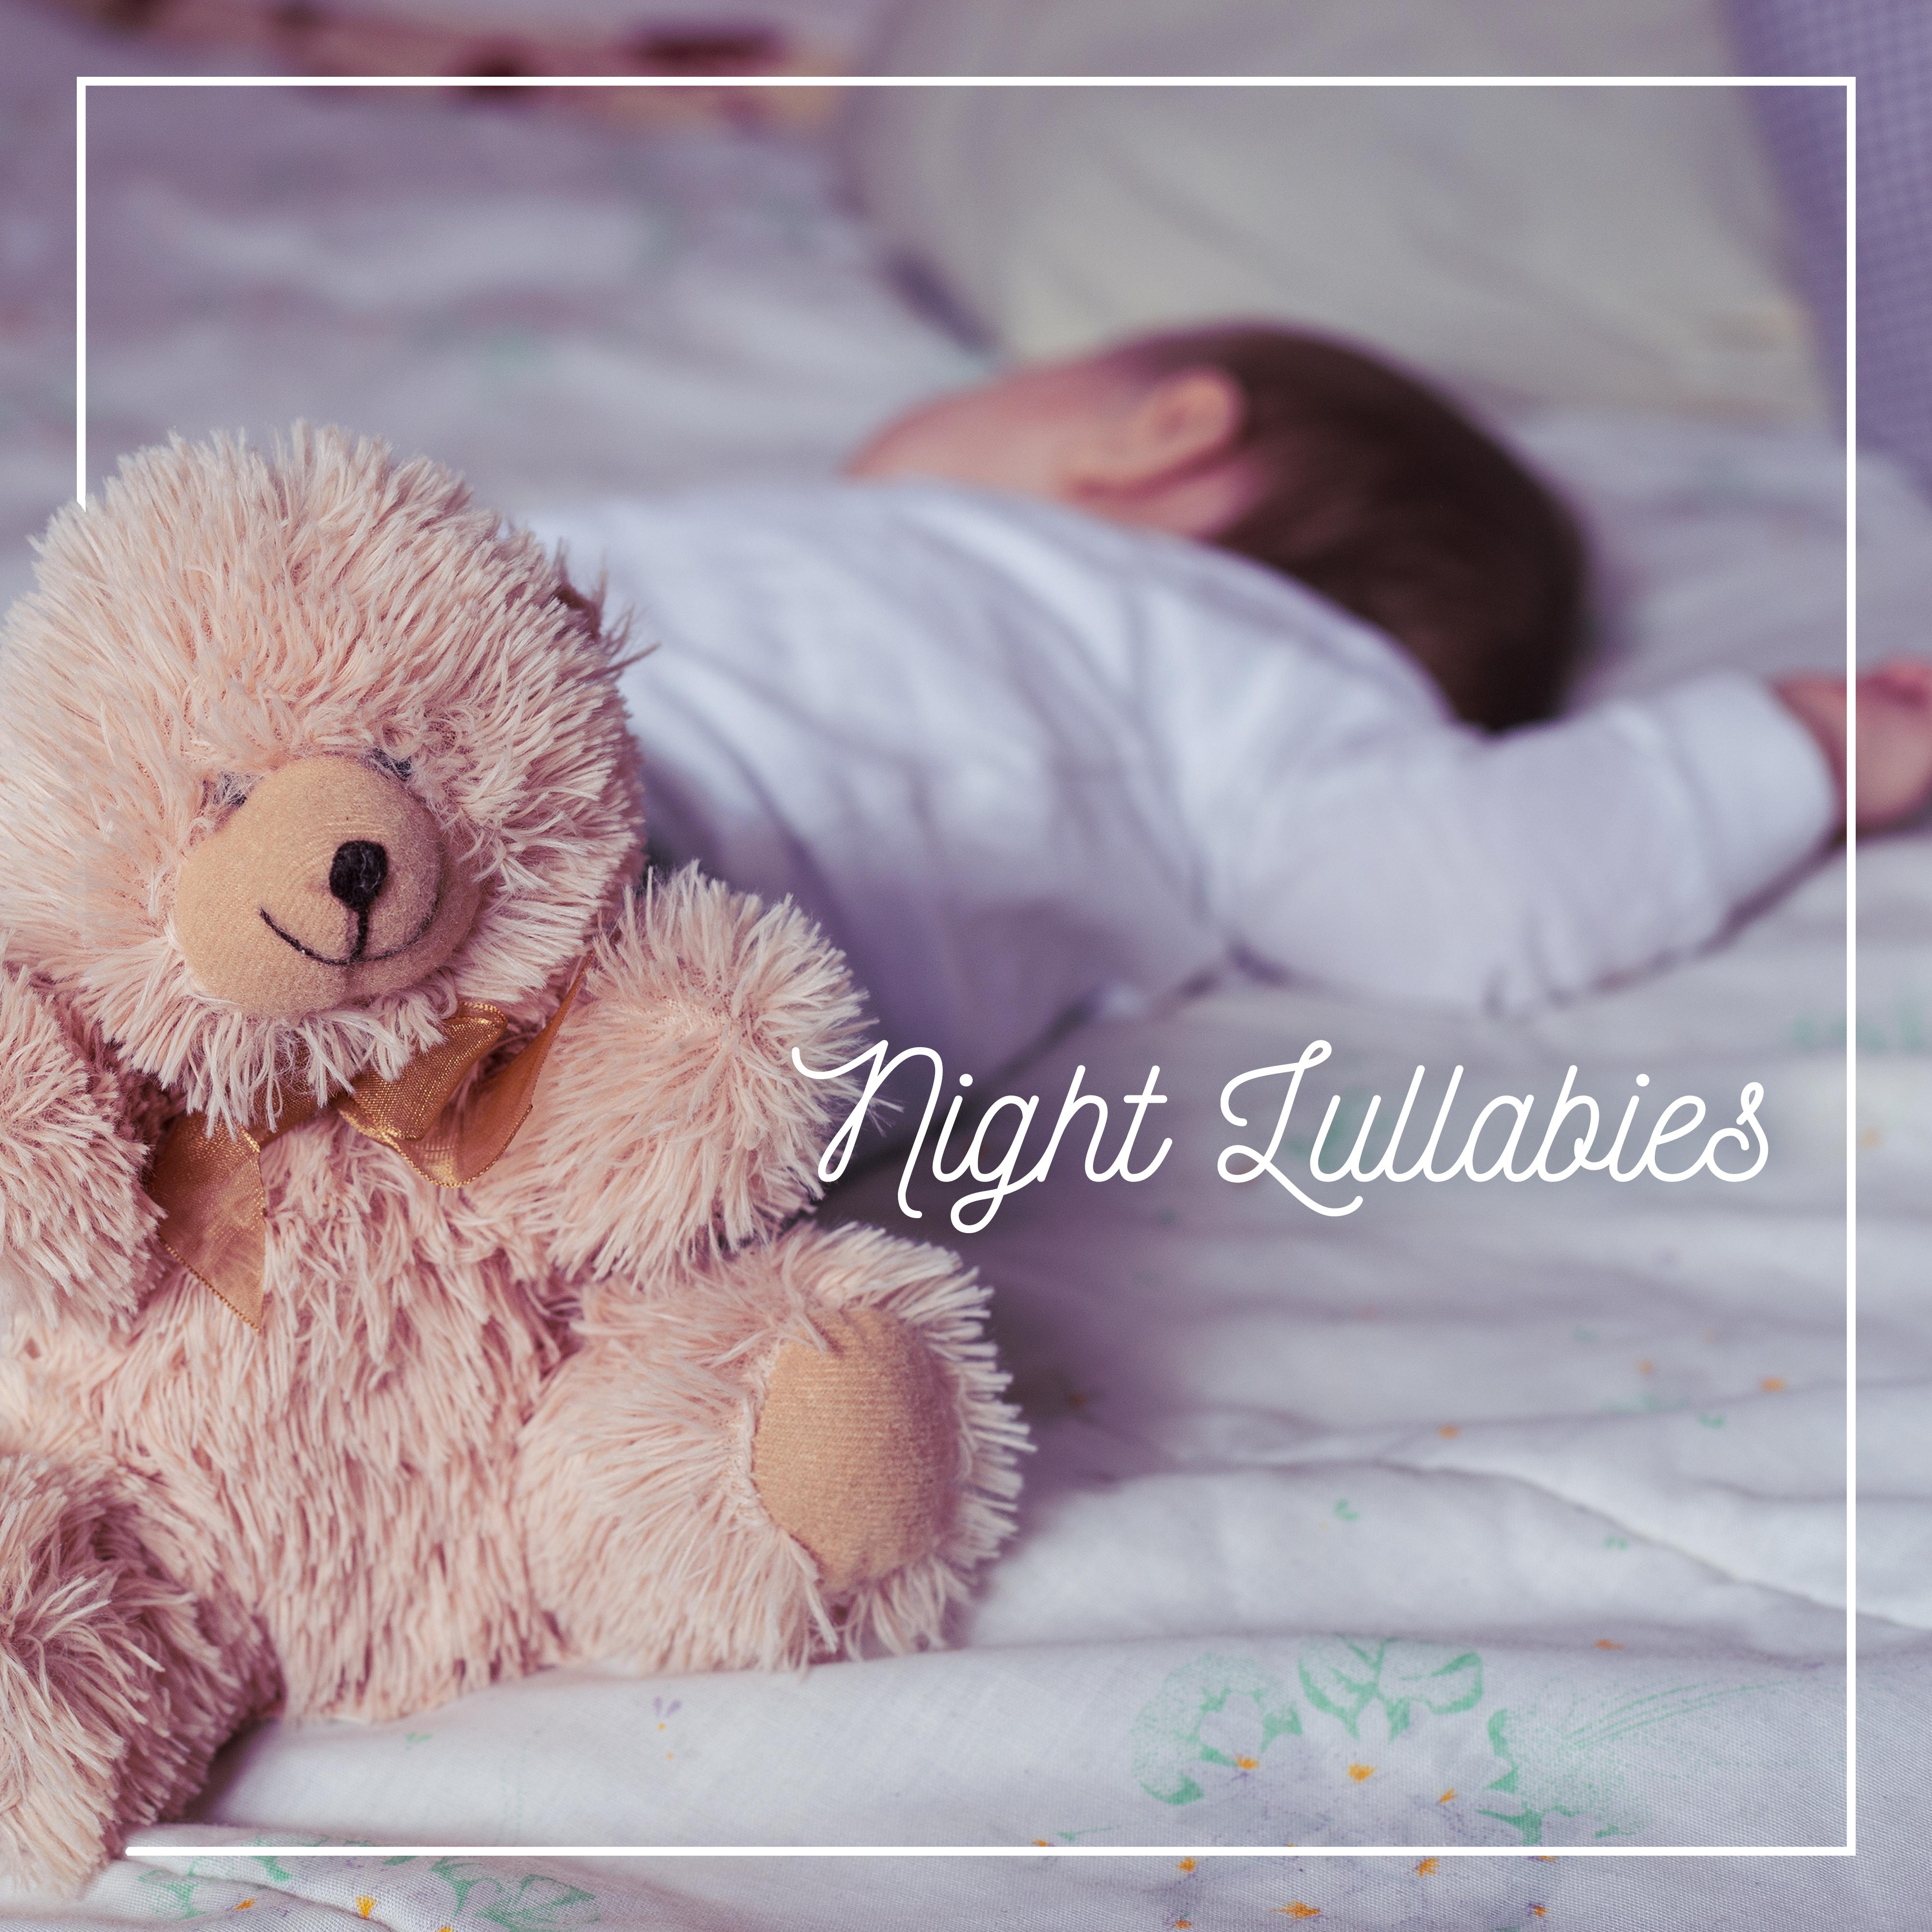 Night Lullabies: Quiet, Calm and Gentle Songs for the Time of Sleep and Rest of the Baby